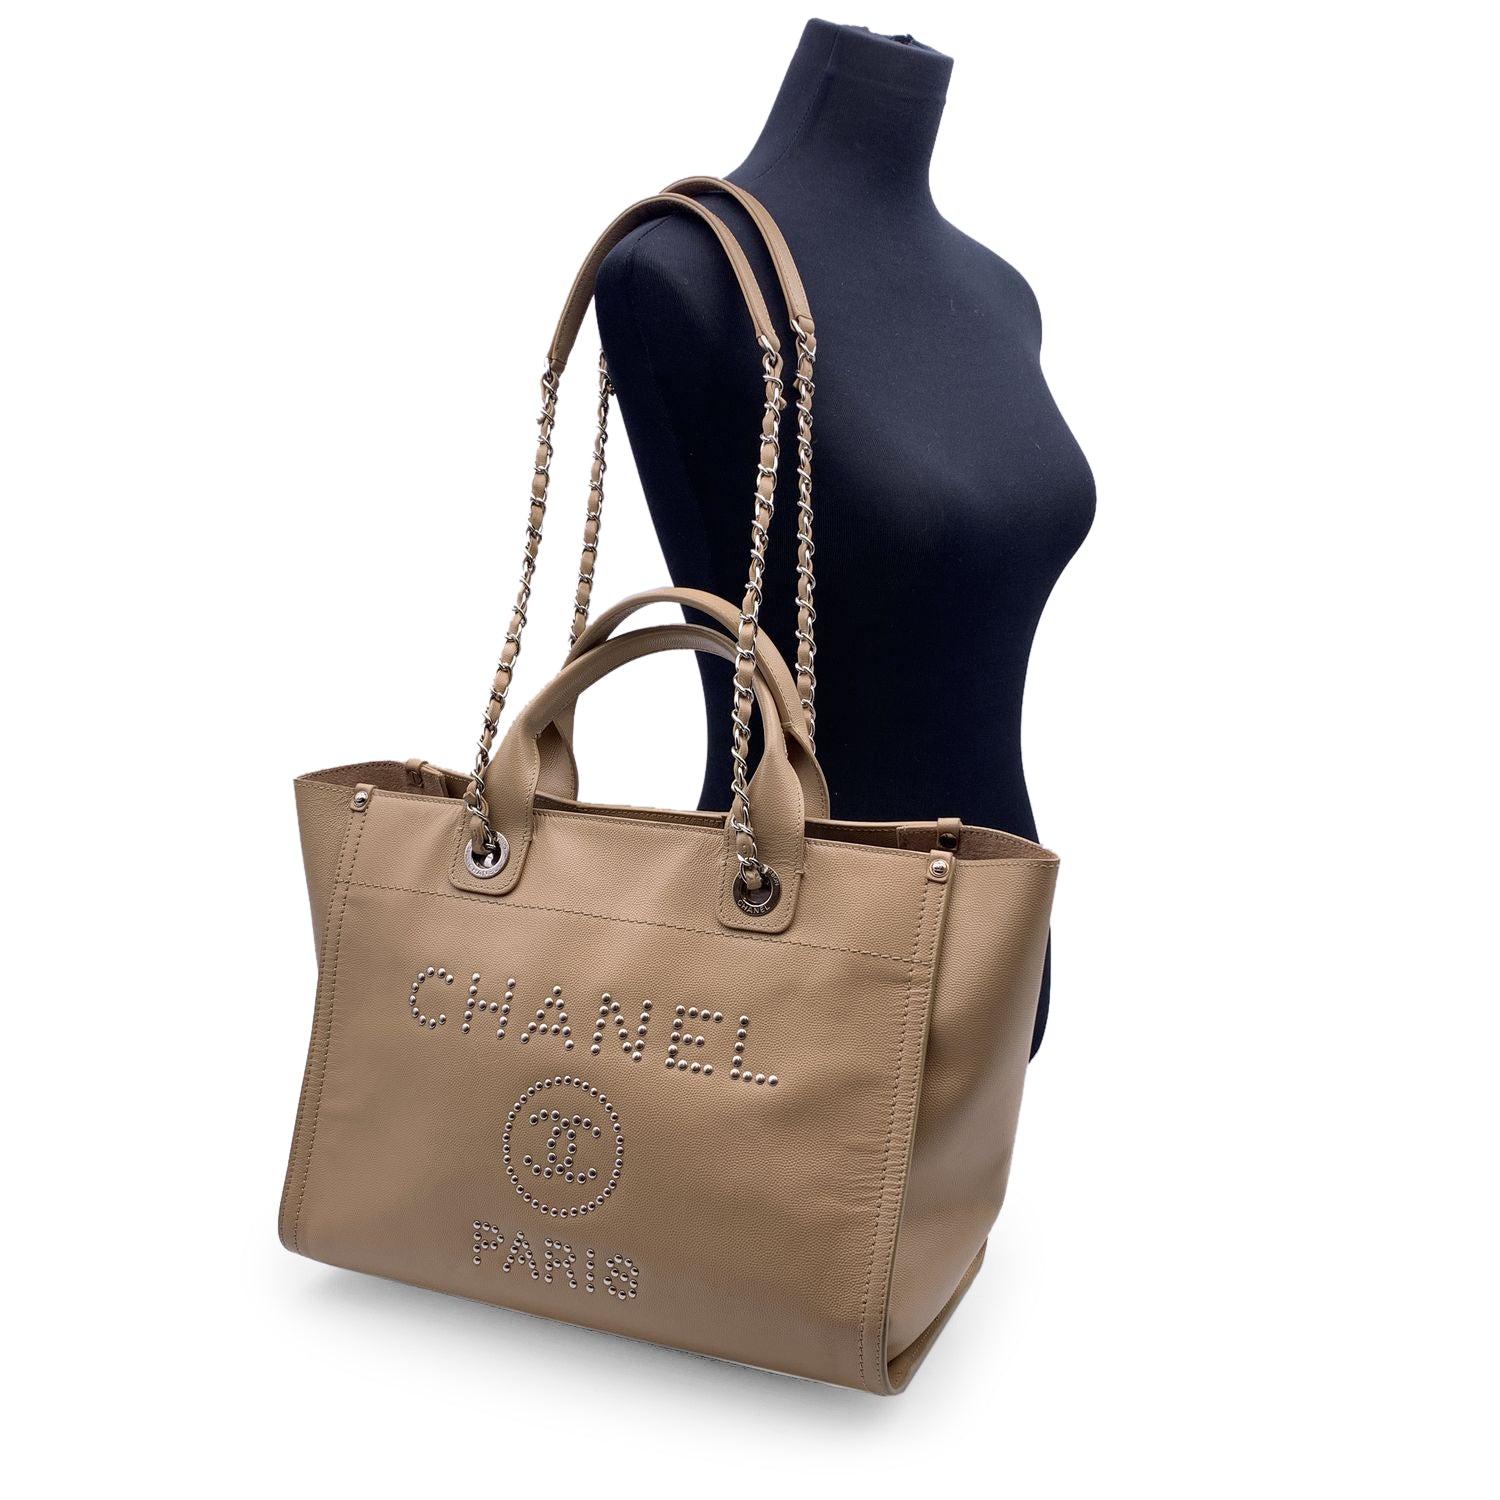 This beautiful Bag will come with a Certificate of Authenticity provided by Entrupy. The certificate will be provided at no further cost. Entrupy for this item at no further cost. Beautiful Chanel 'Deauville' tote, crafted in beige caviar leather.